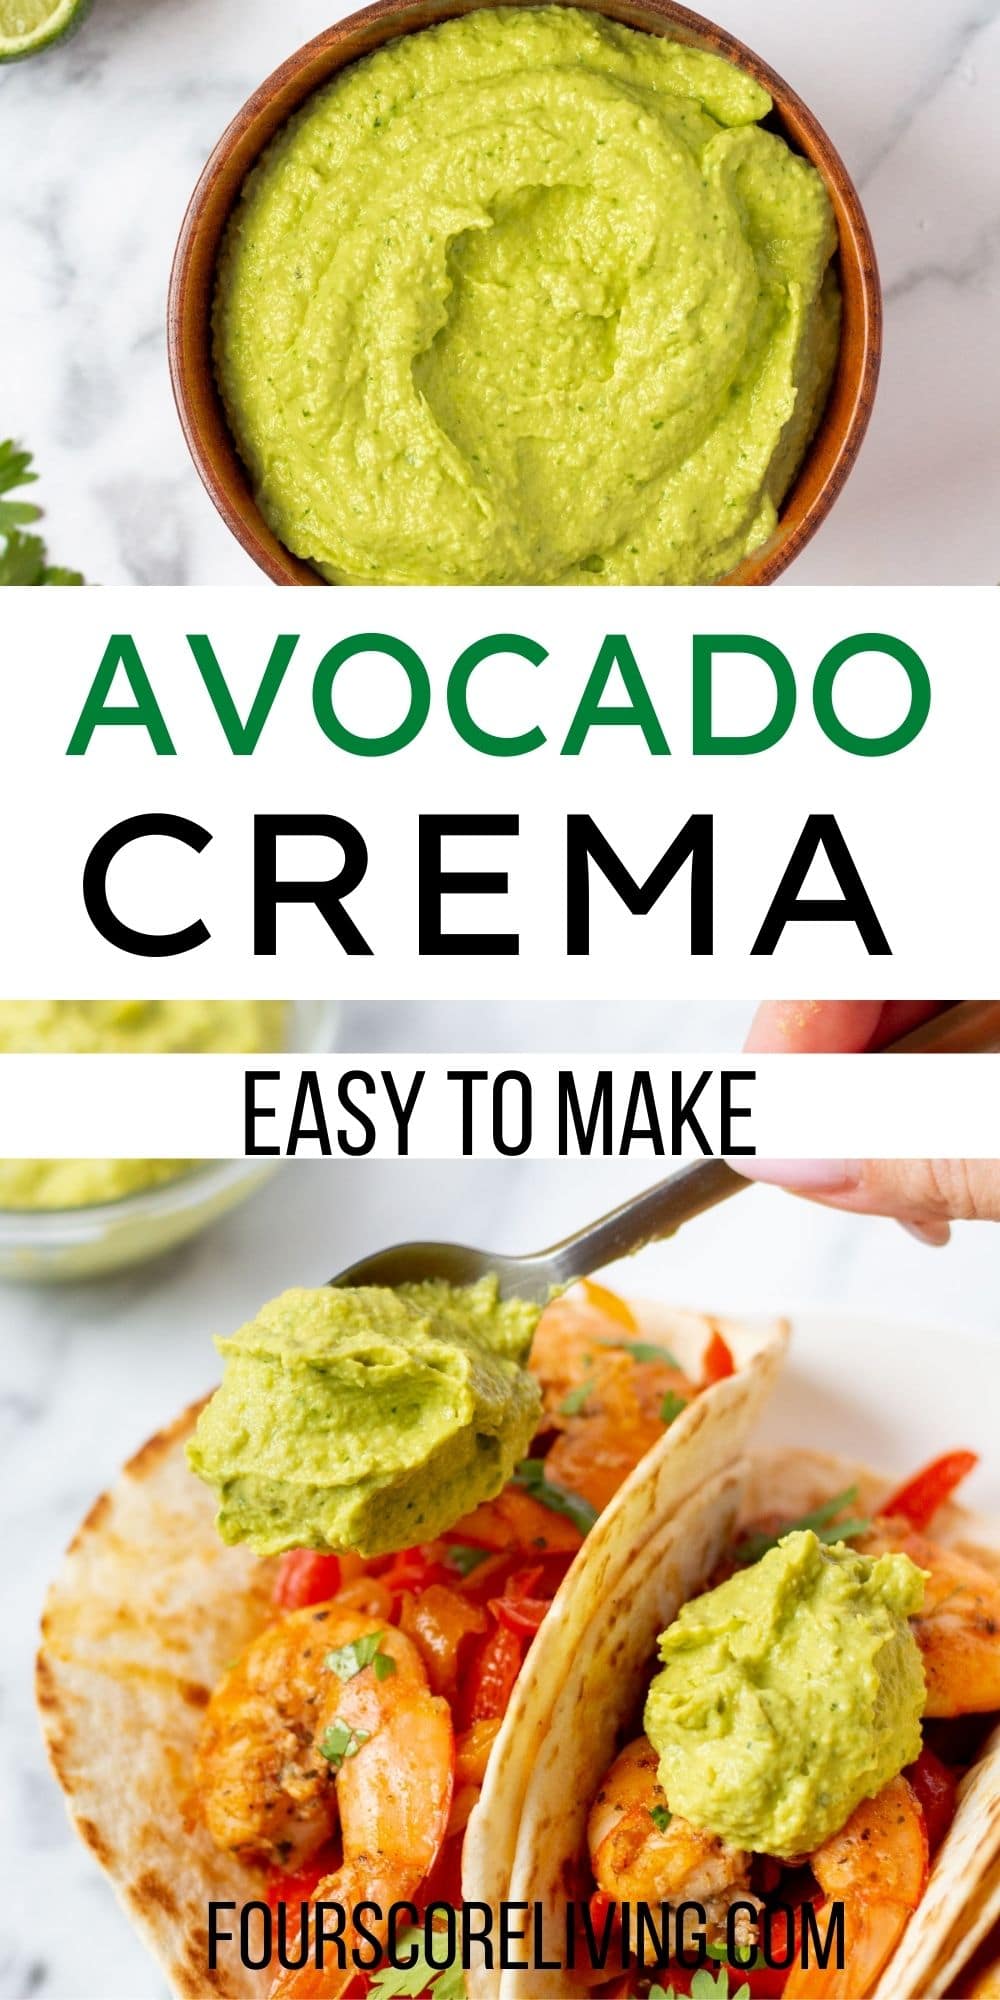 To images of avocado crema. One in a bowl, another on top of tacos. Text in center says Avocado Cream, Easy to Make